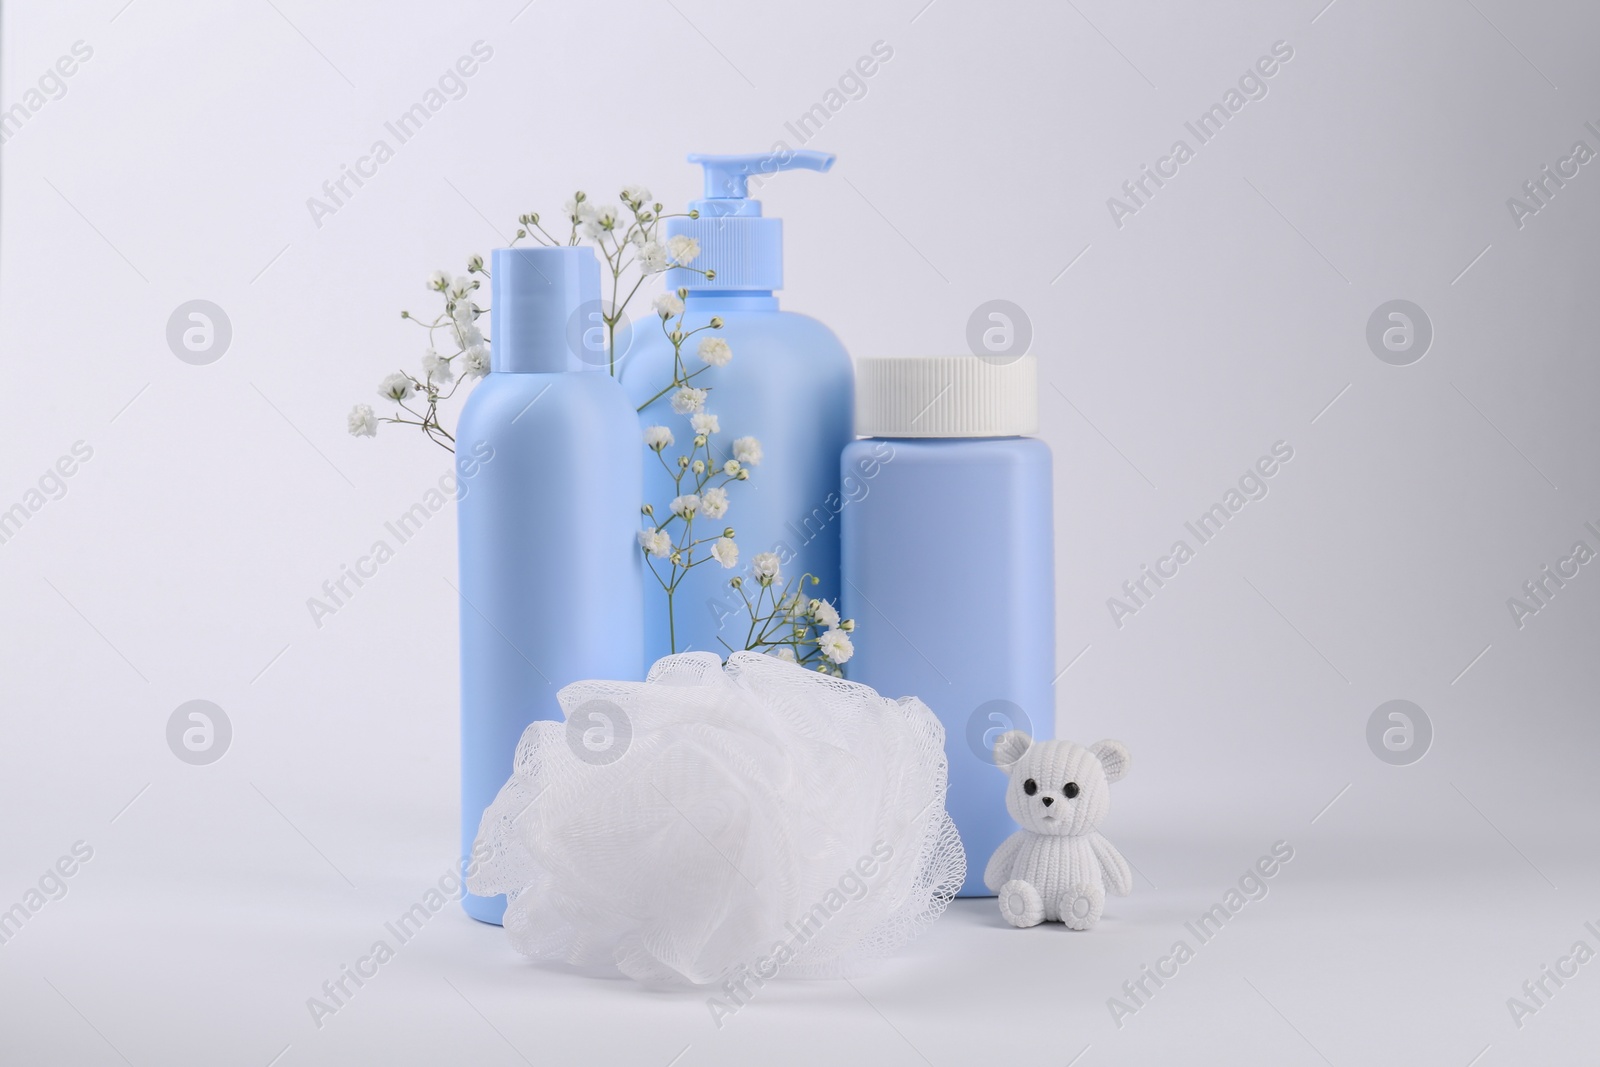 Photo of Different skin care products for baby, shower puff and toy on white background